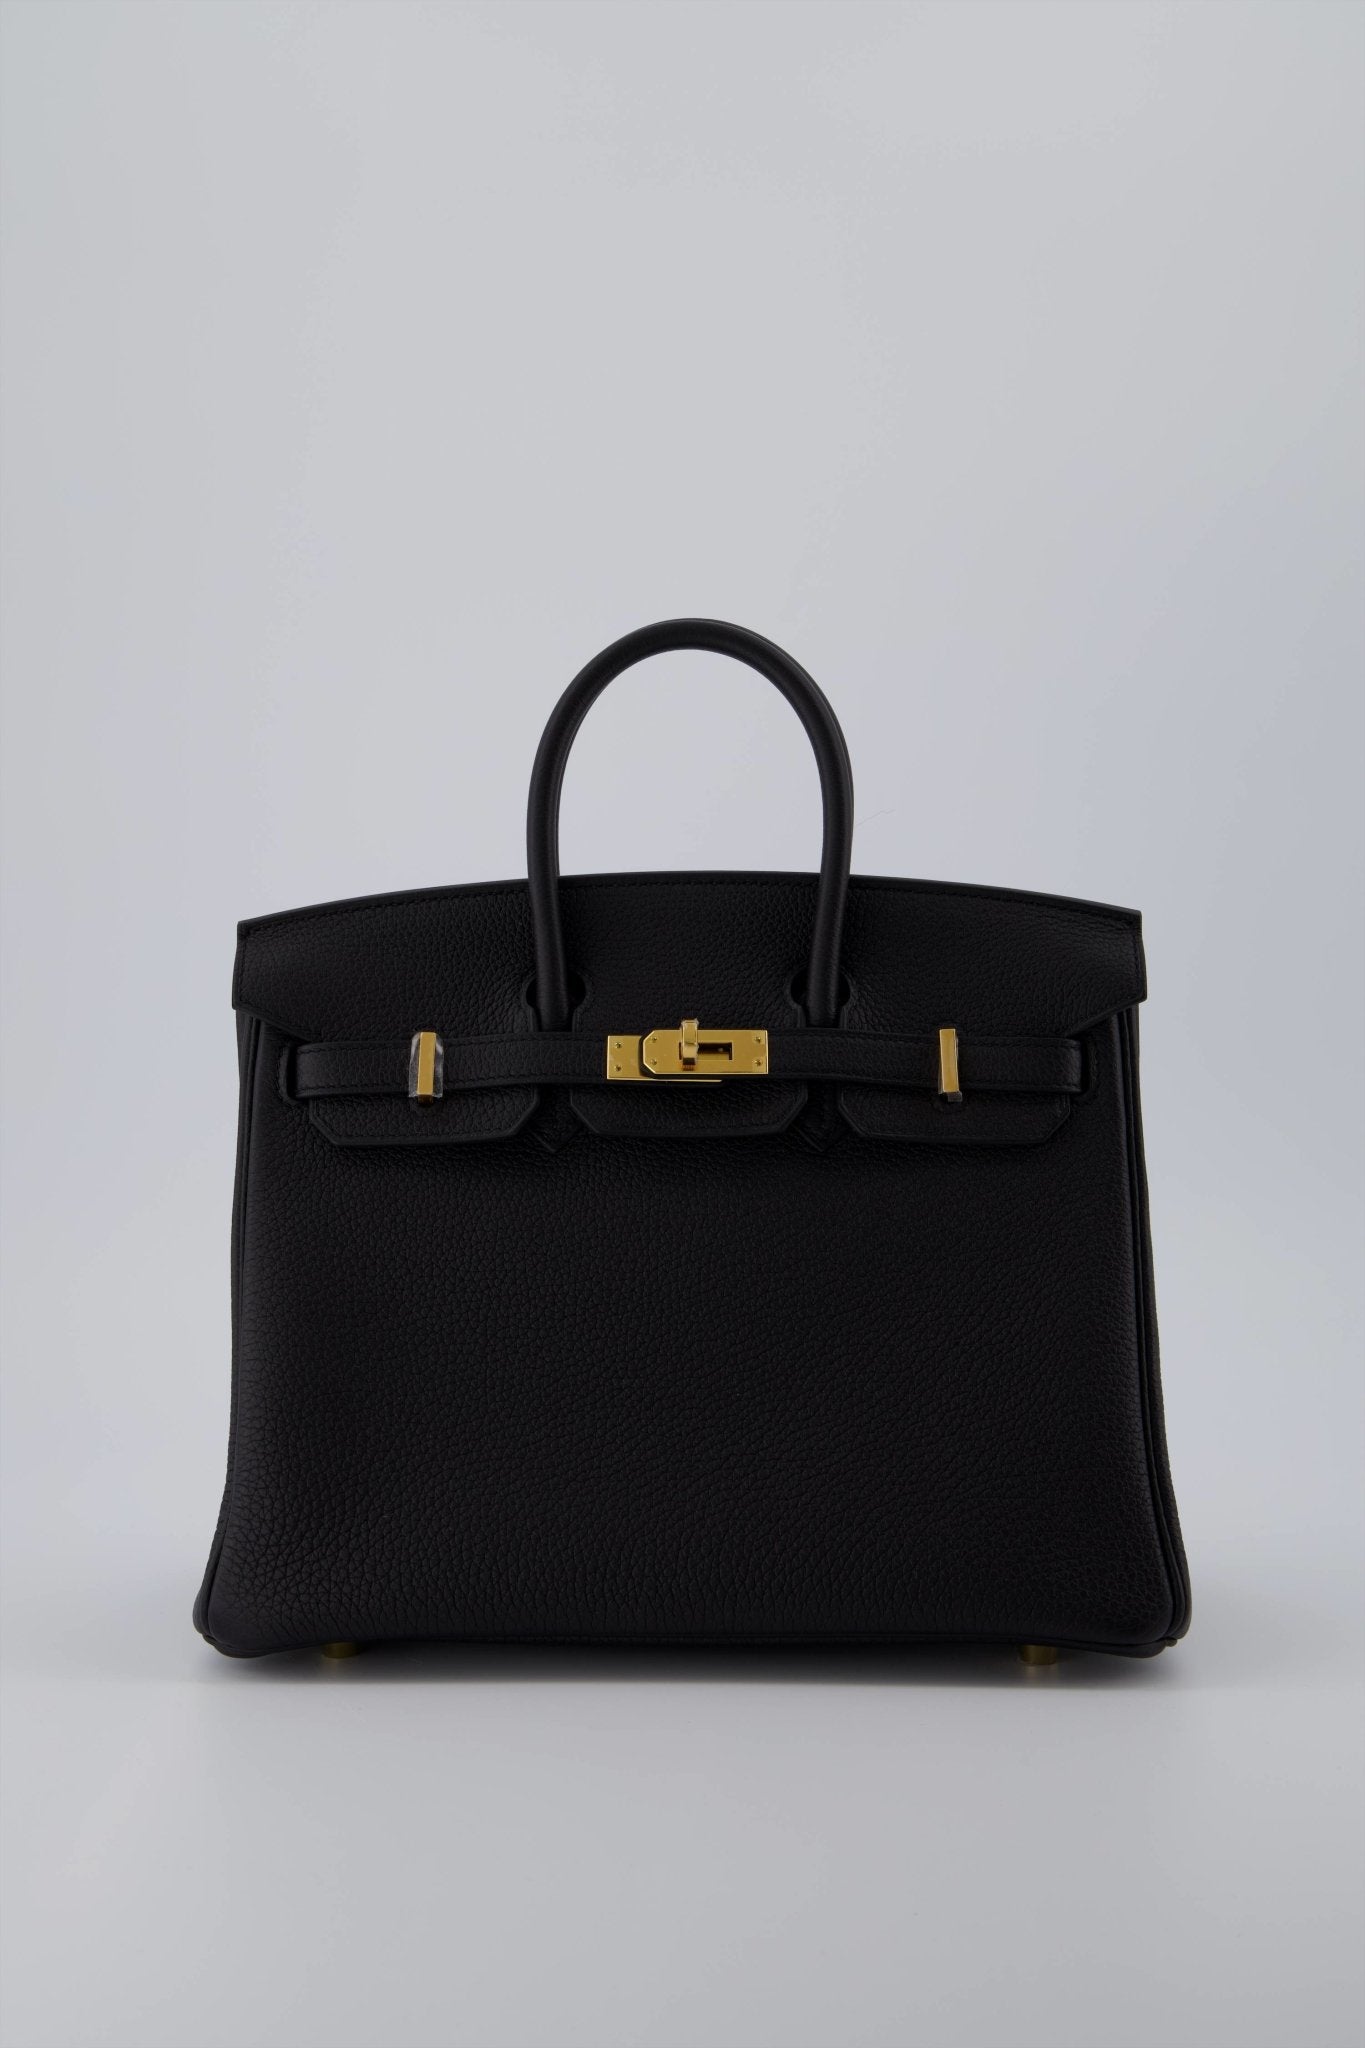 Holy Grail* Hermes Birkin 25 Handbag Black Togo Leather With Gold Har –  Bags Of Personality